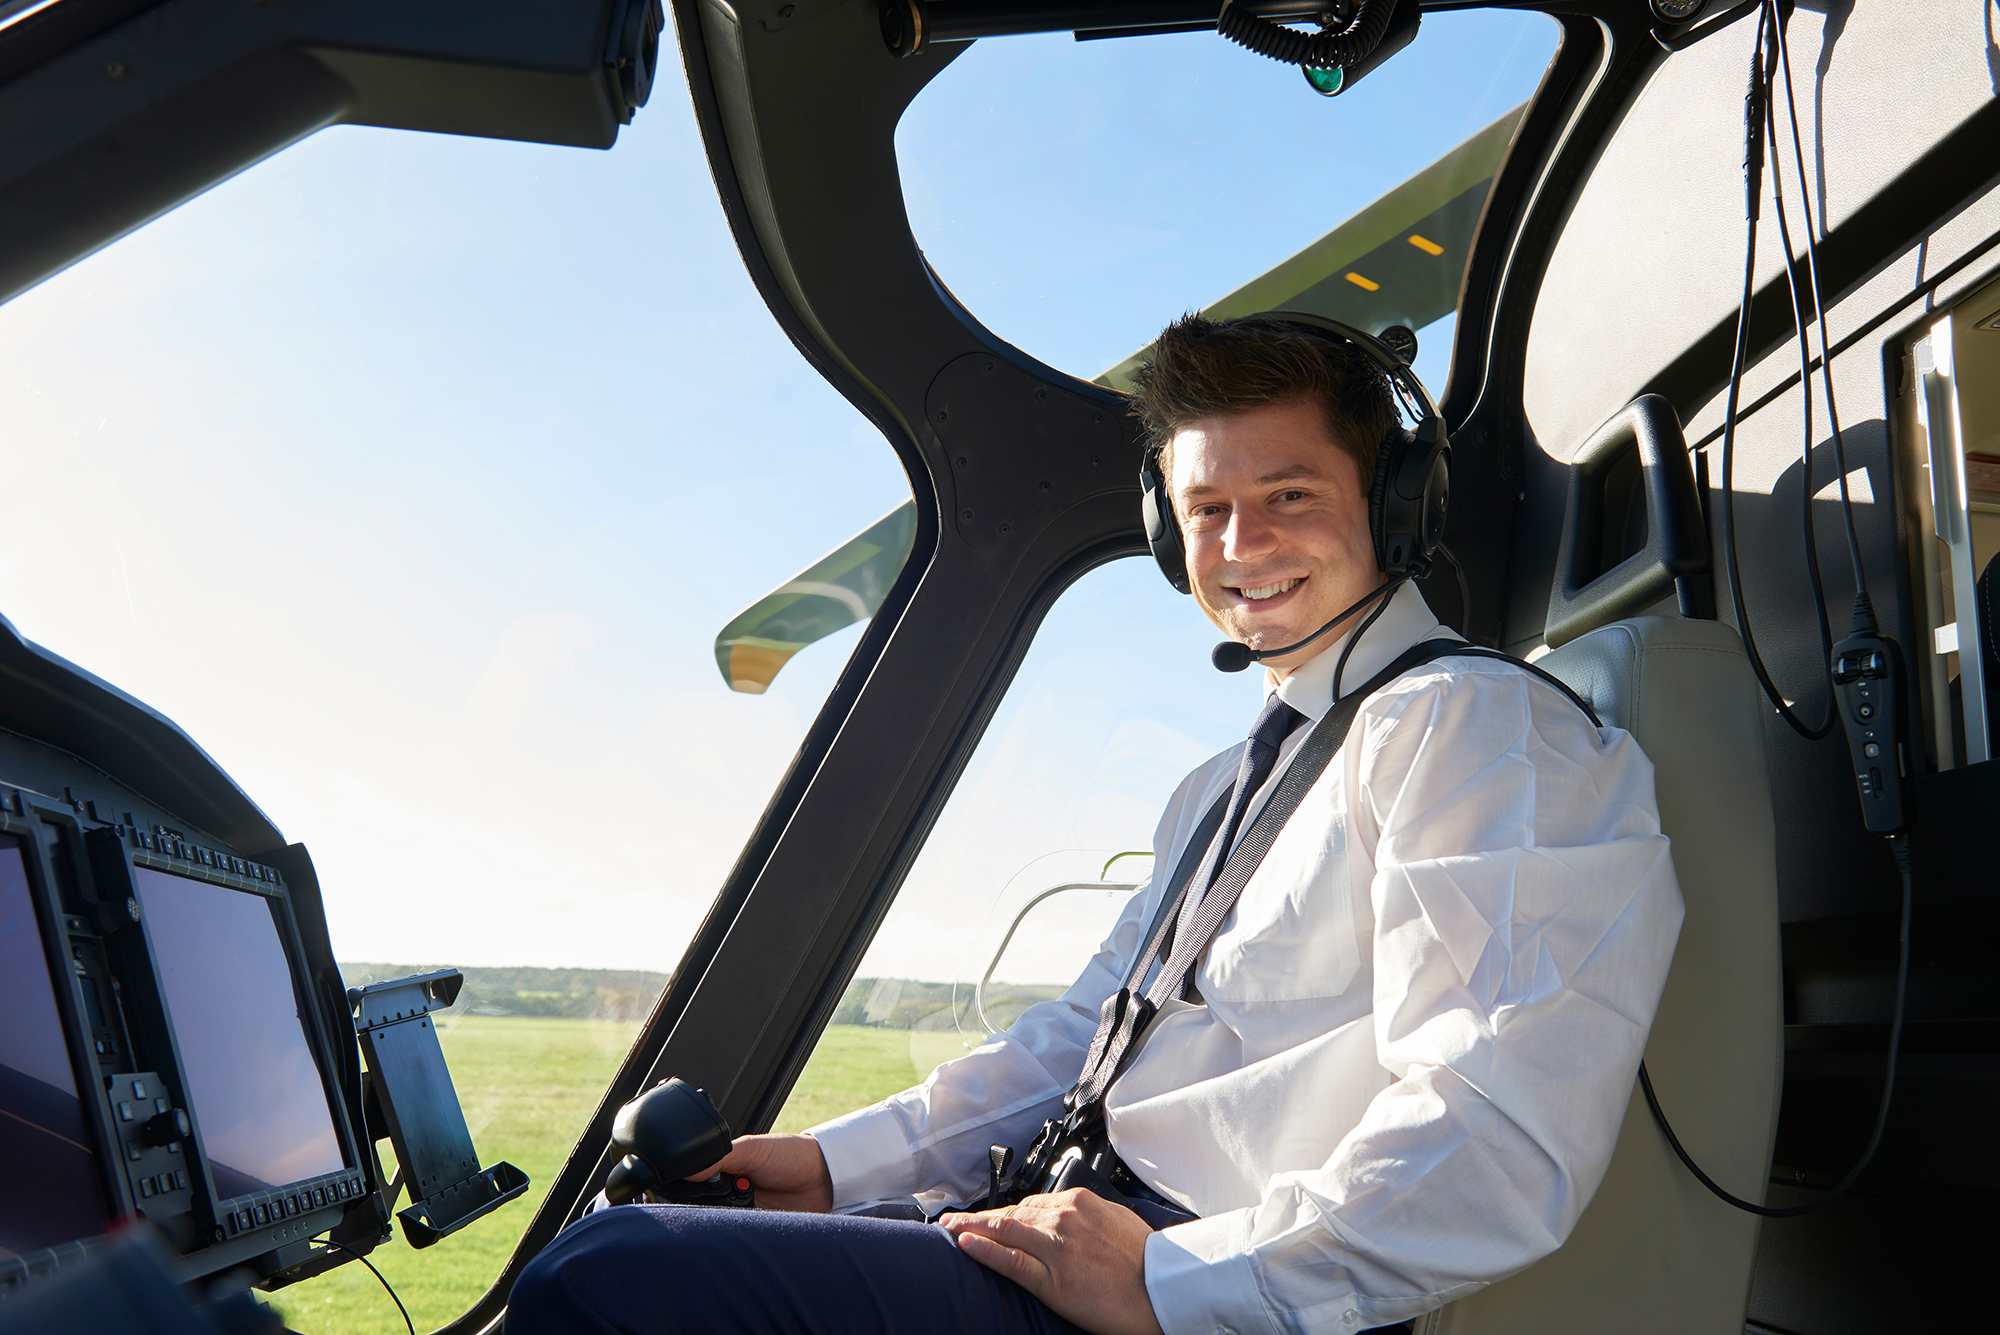 Getting-a-Job-as-a-Commercial-Helicopter-Pilot